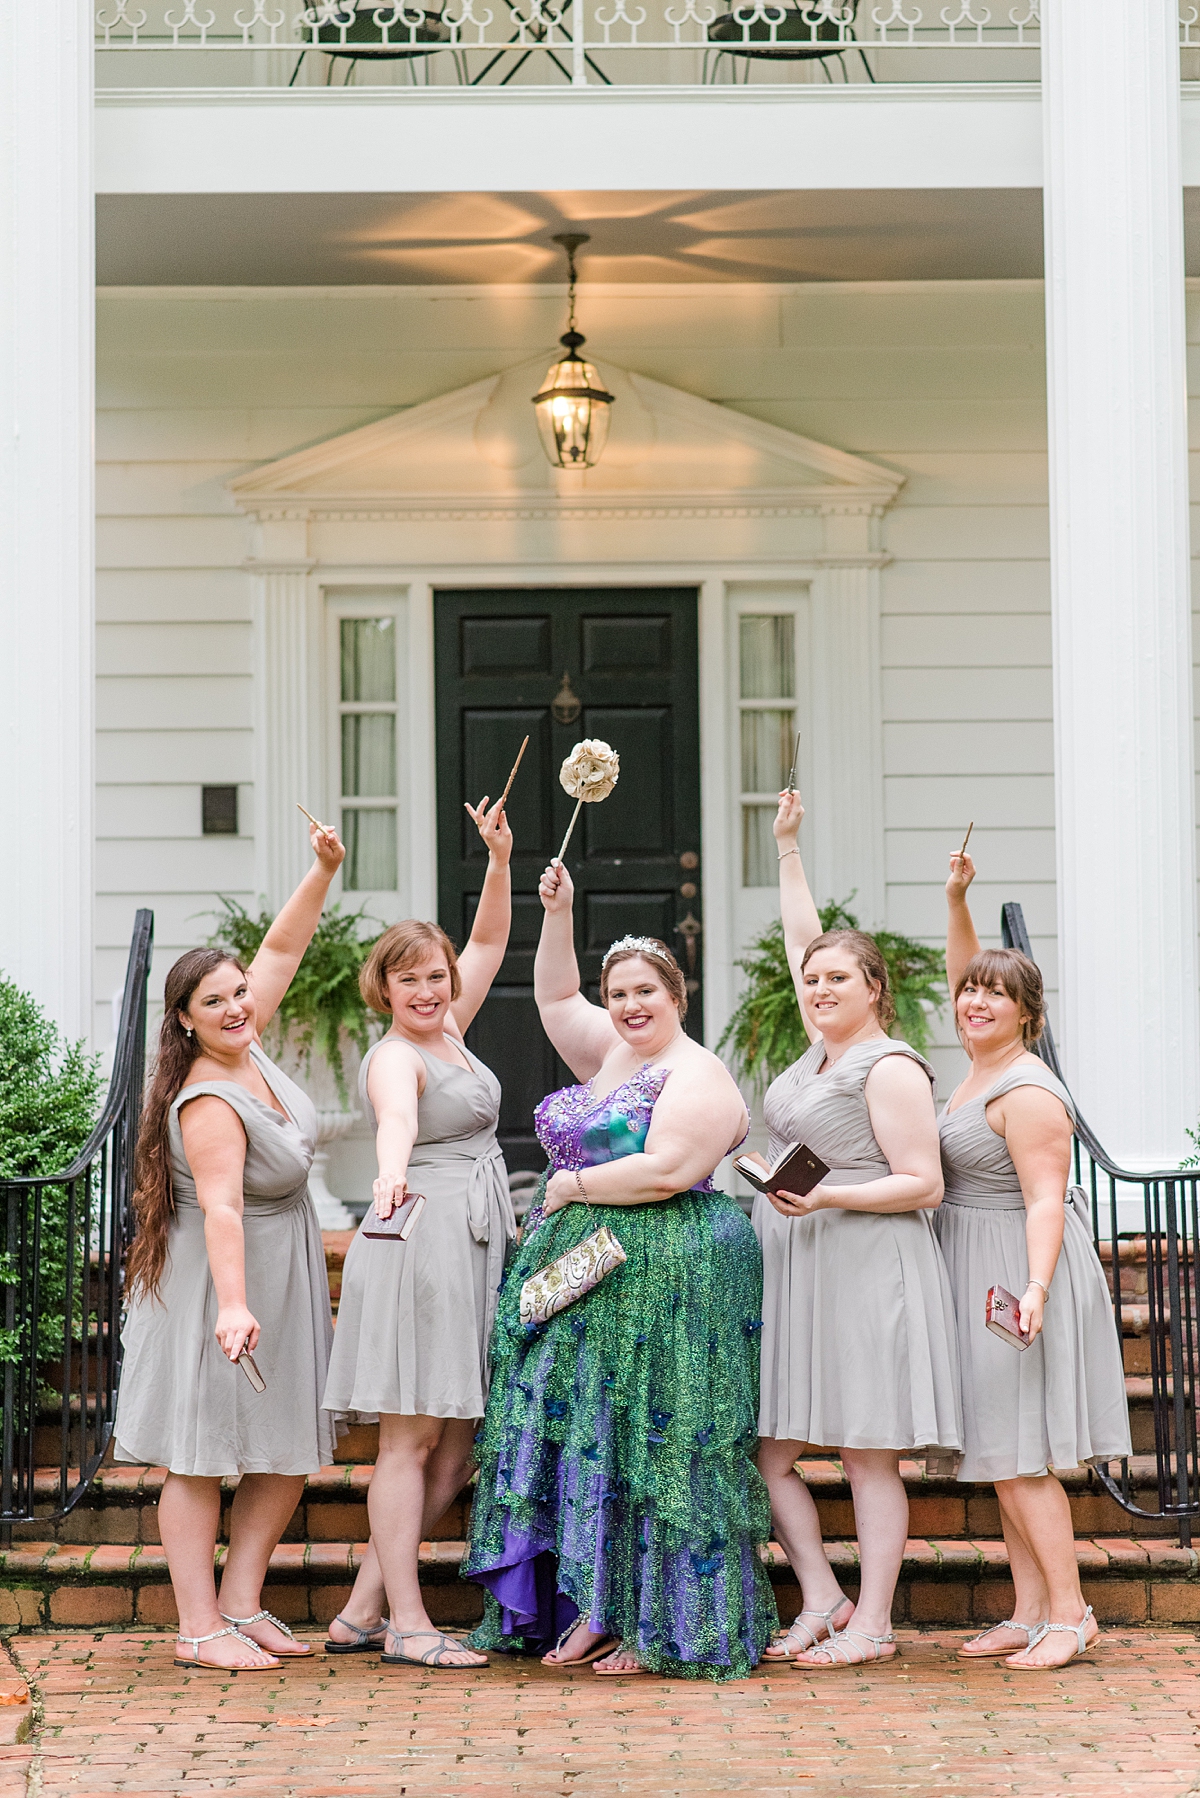 Harry Potter Themed Bridal Party Portraits at Virginia Cliffe Inn Wedding. Wedding Photography by Richmond Wedding Photographer Kailey Brianne Photography. 